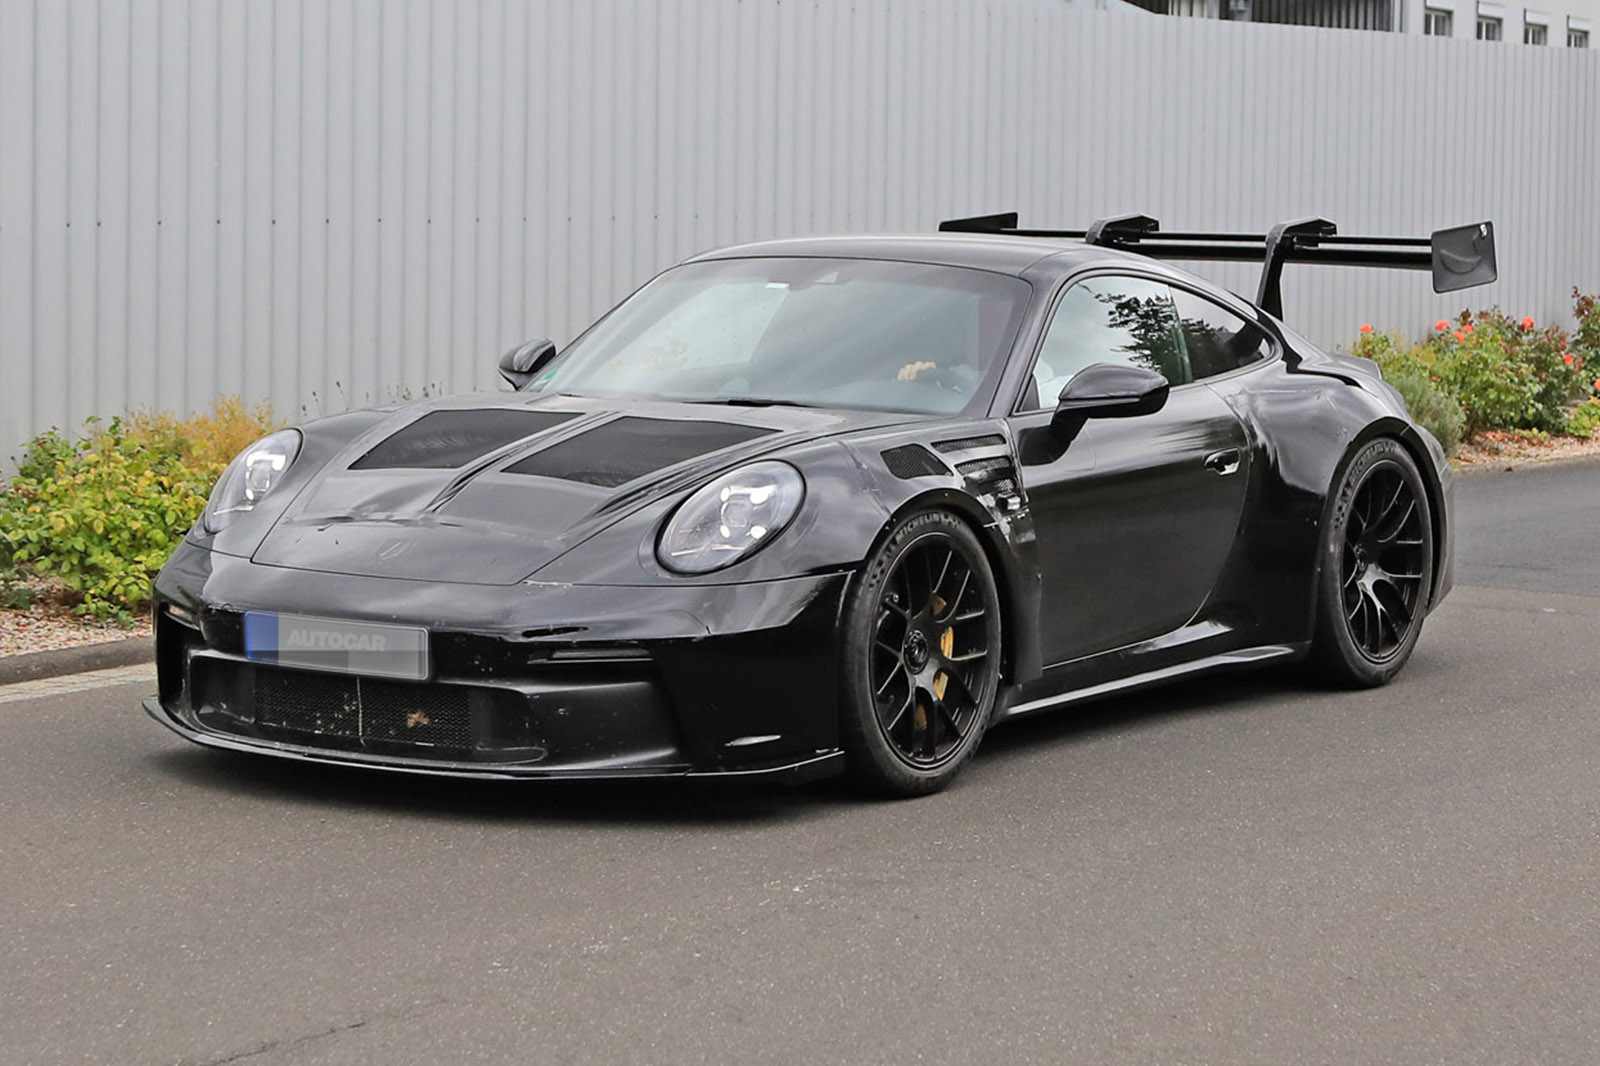 Extreme Porsche 911 Gt3 Rs Prototype Seen For The First Time Autocar